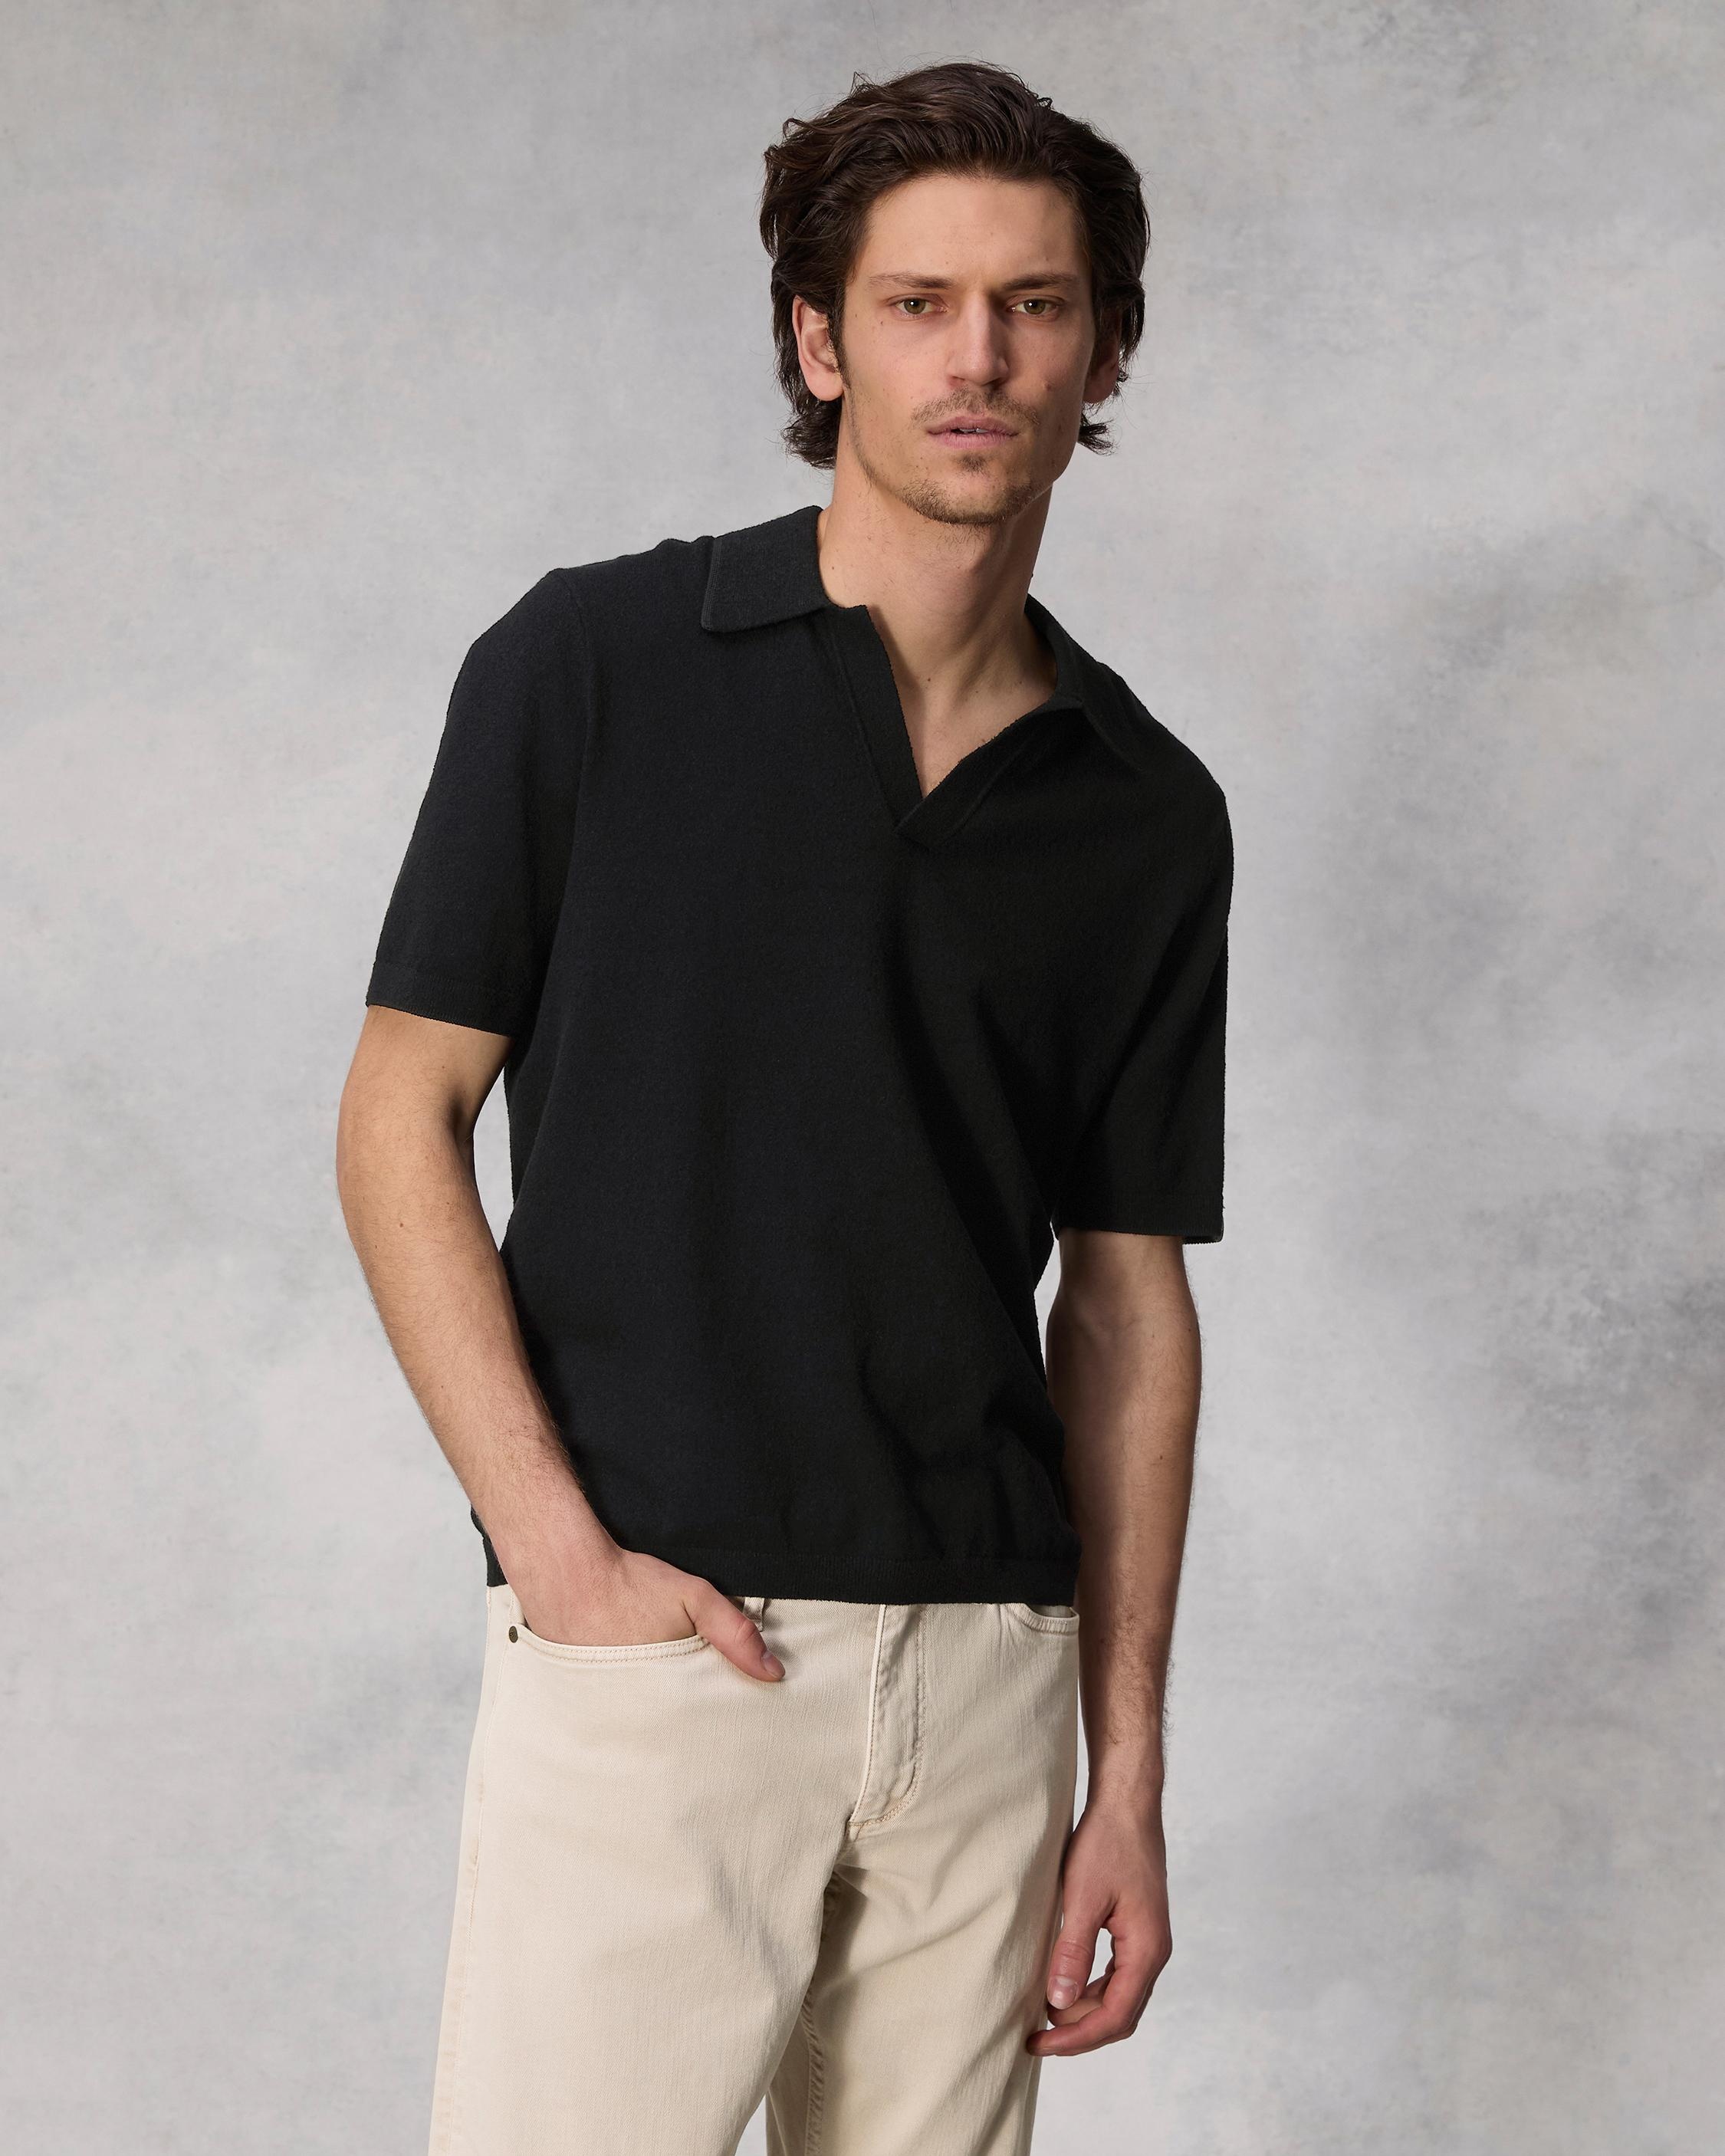 Johnny Zuma Toweling Polo
Classic Fit - 2